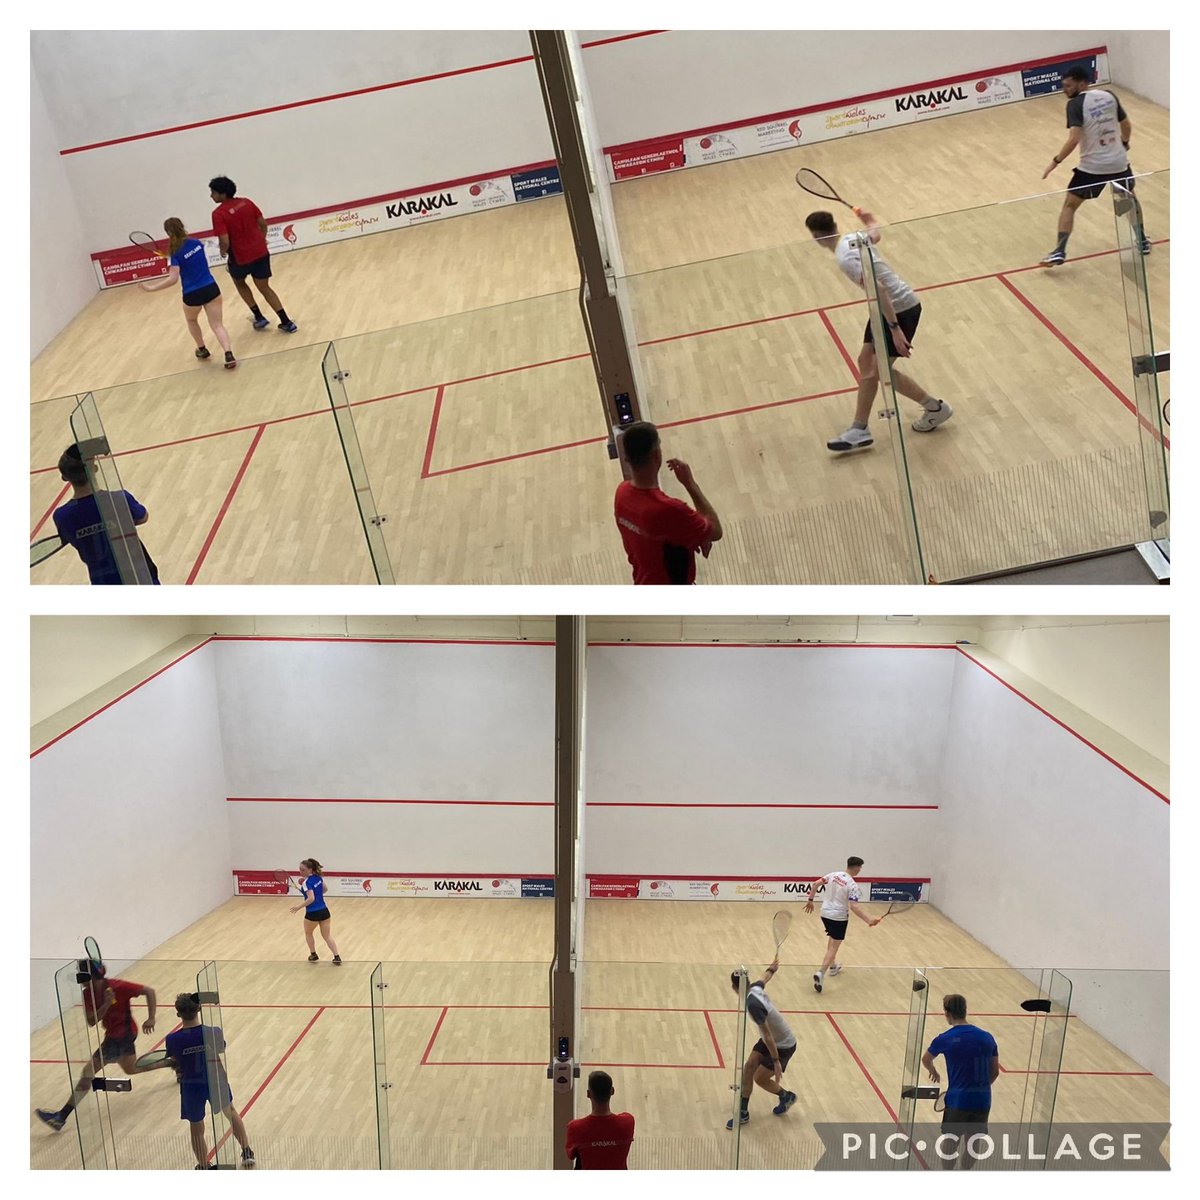 Good to get back into the training nights after some time off. Players worked really hard @sqwales elite training session. Positive progression being made. Well done all